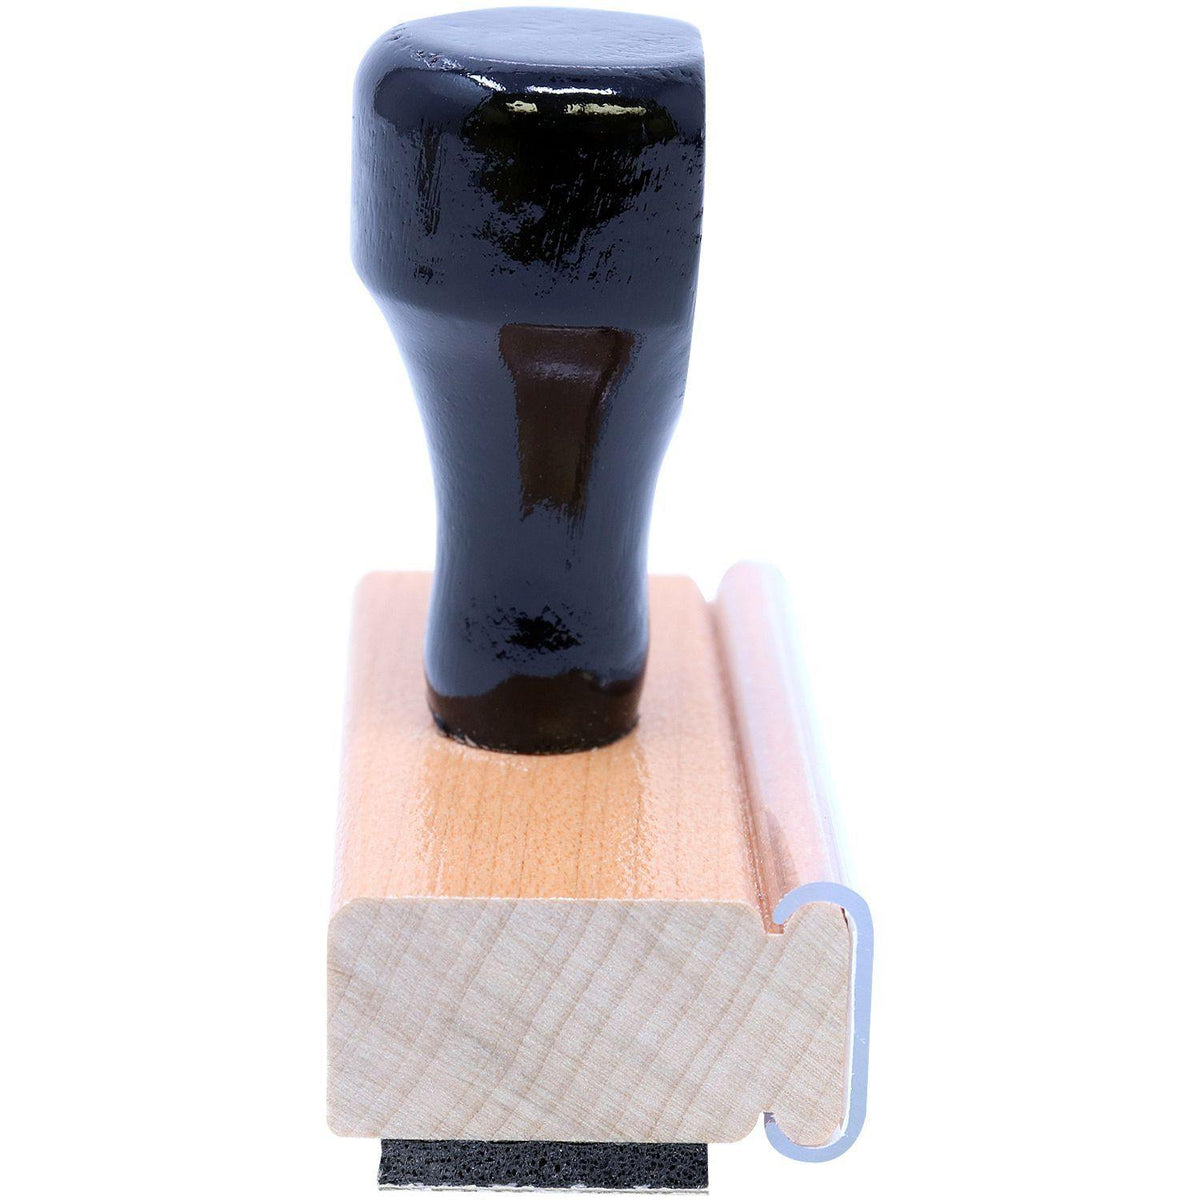 Large Spoiled Rubber Stamp - Engineer Seal Stamps - Brand_Acorn, Impression Size_Large, Stamp Type_Regular Stamp, Type of Use_General